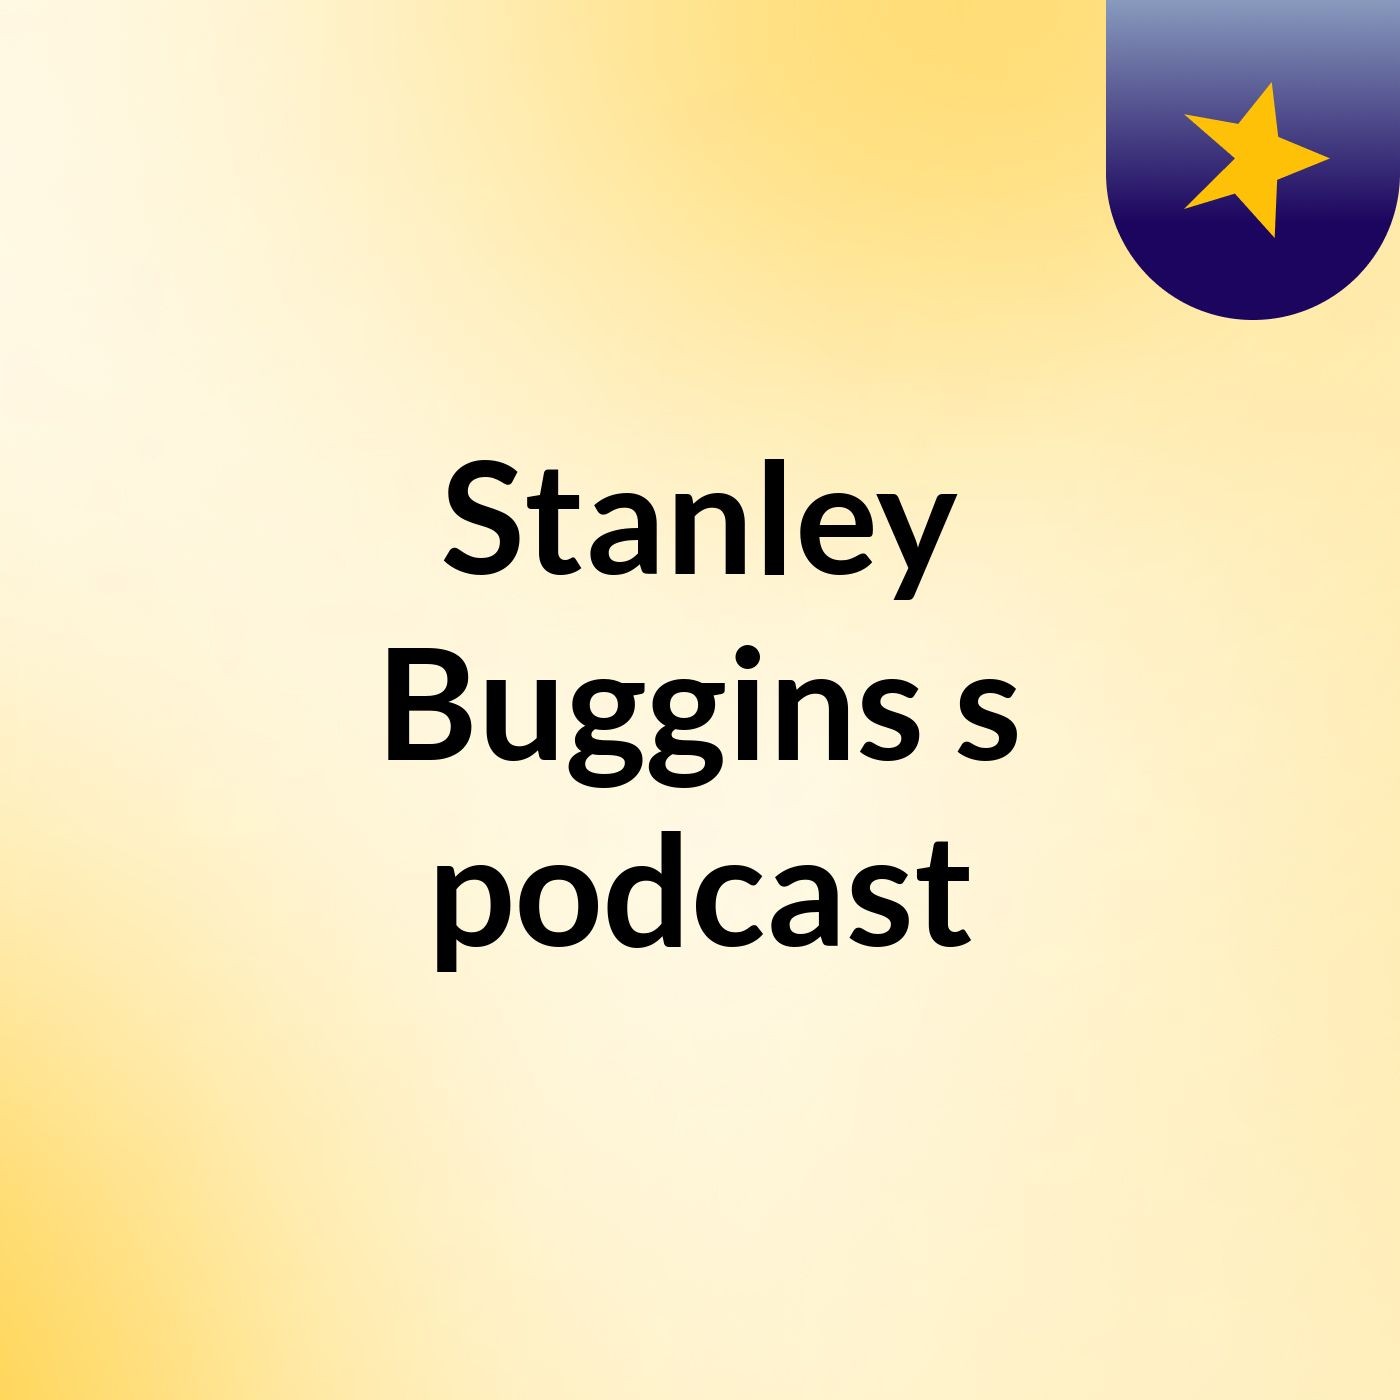 Stanley Buggins's podcast